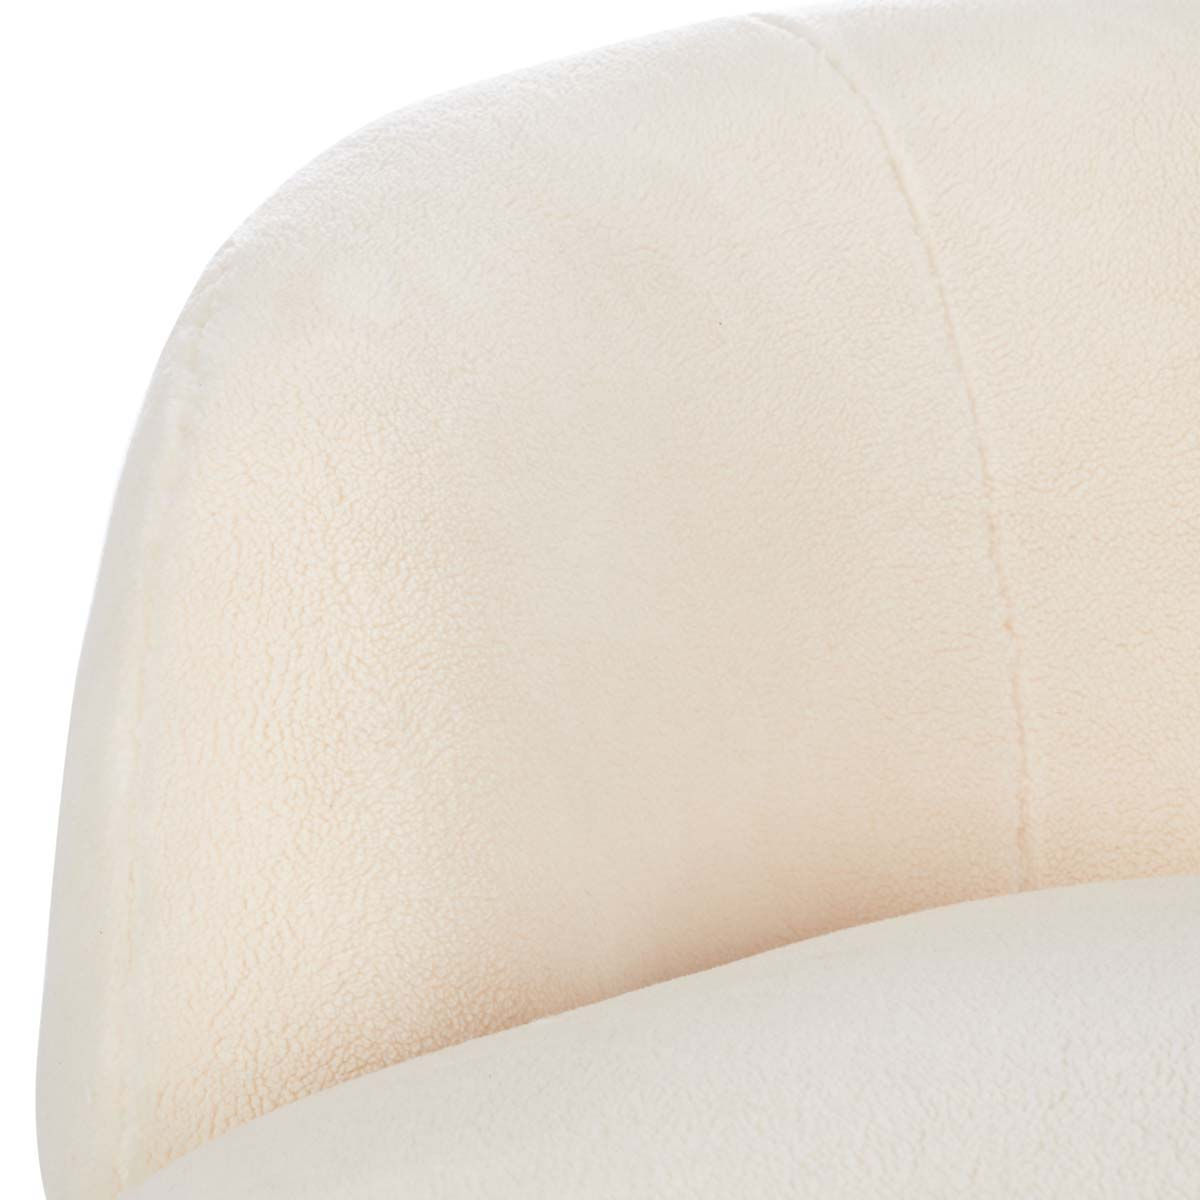 Safavieh Couture Flynn Faux Lamb Wool Swivel Chair - Ivory / Gold